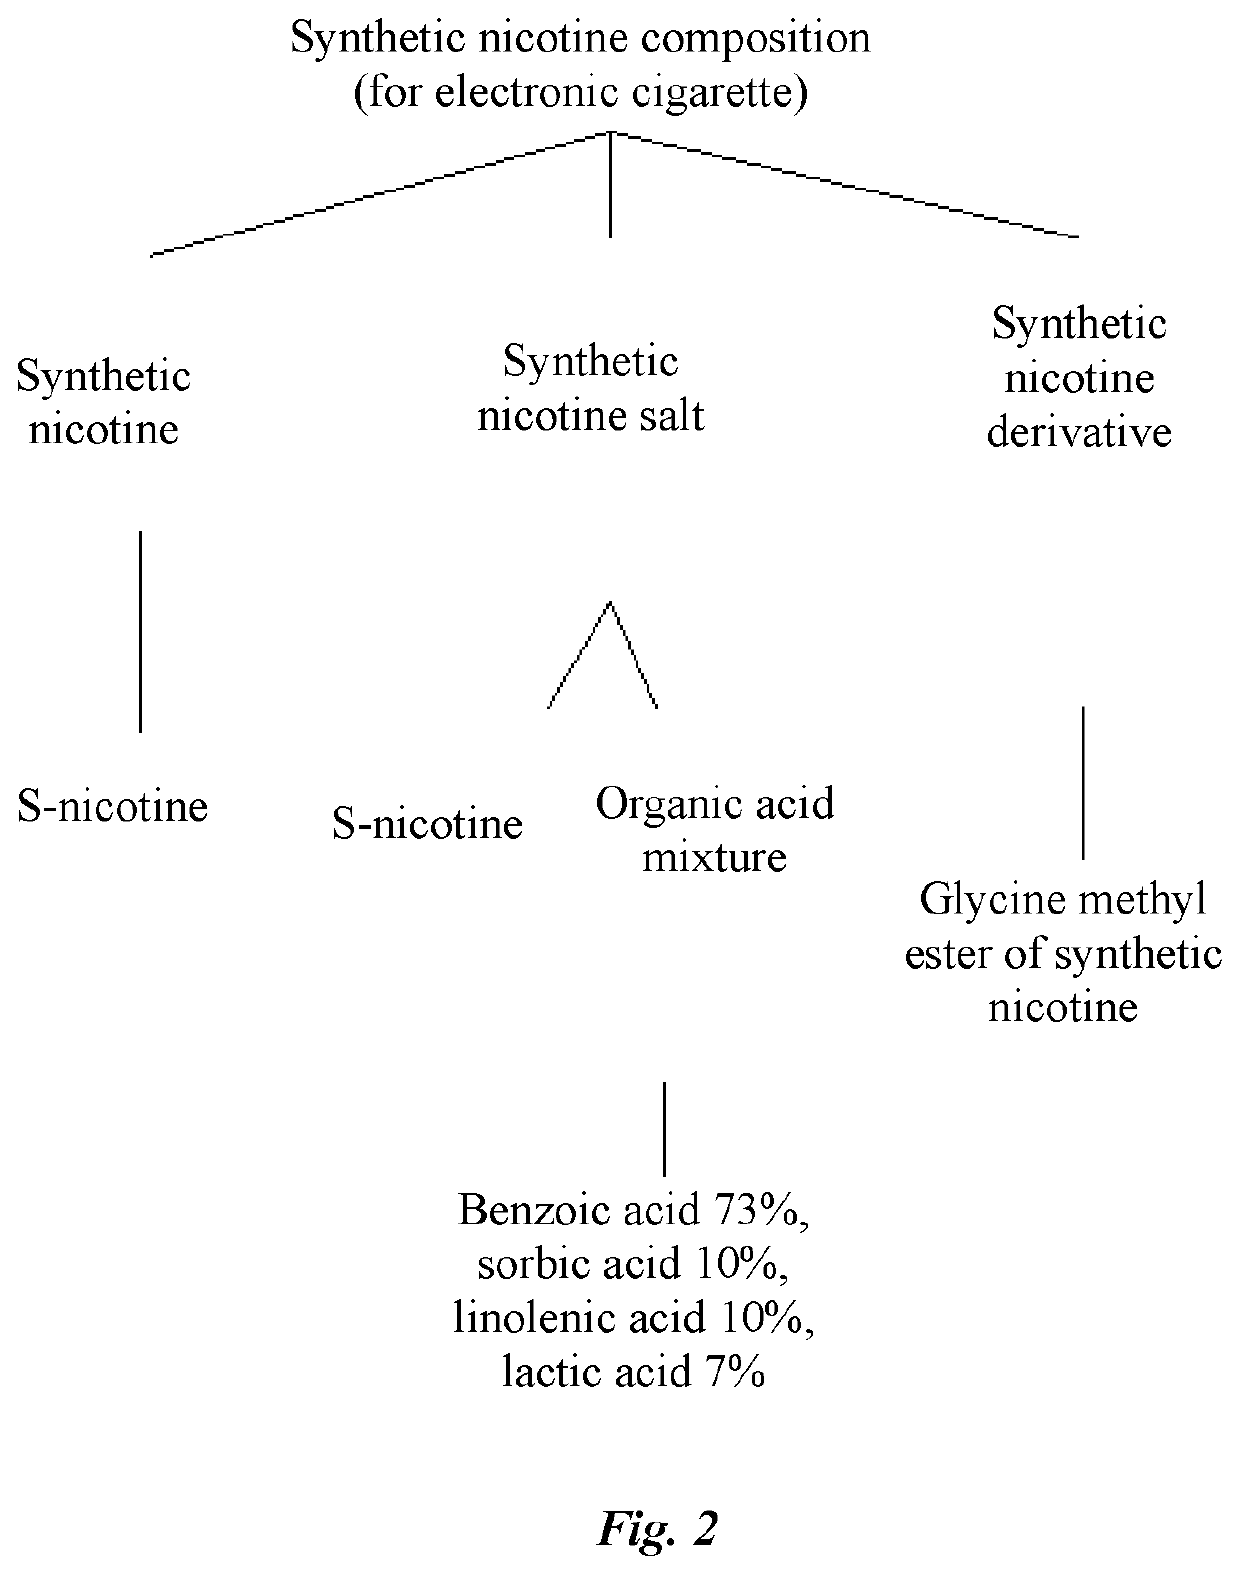 Synthetic Nicotine Composition